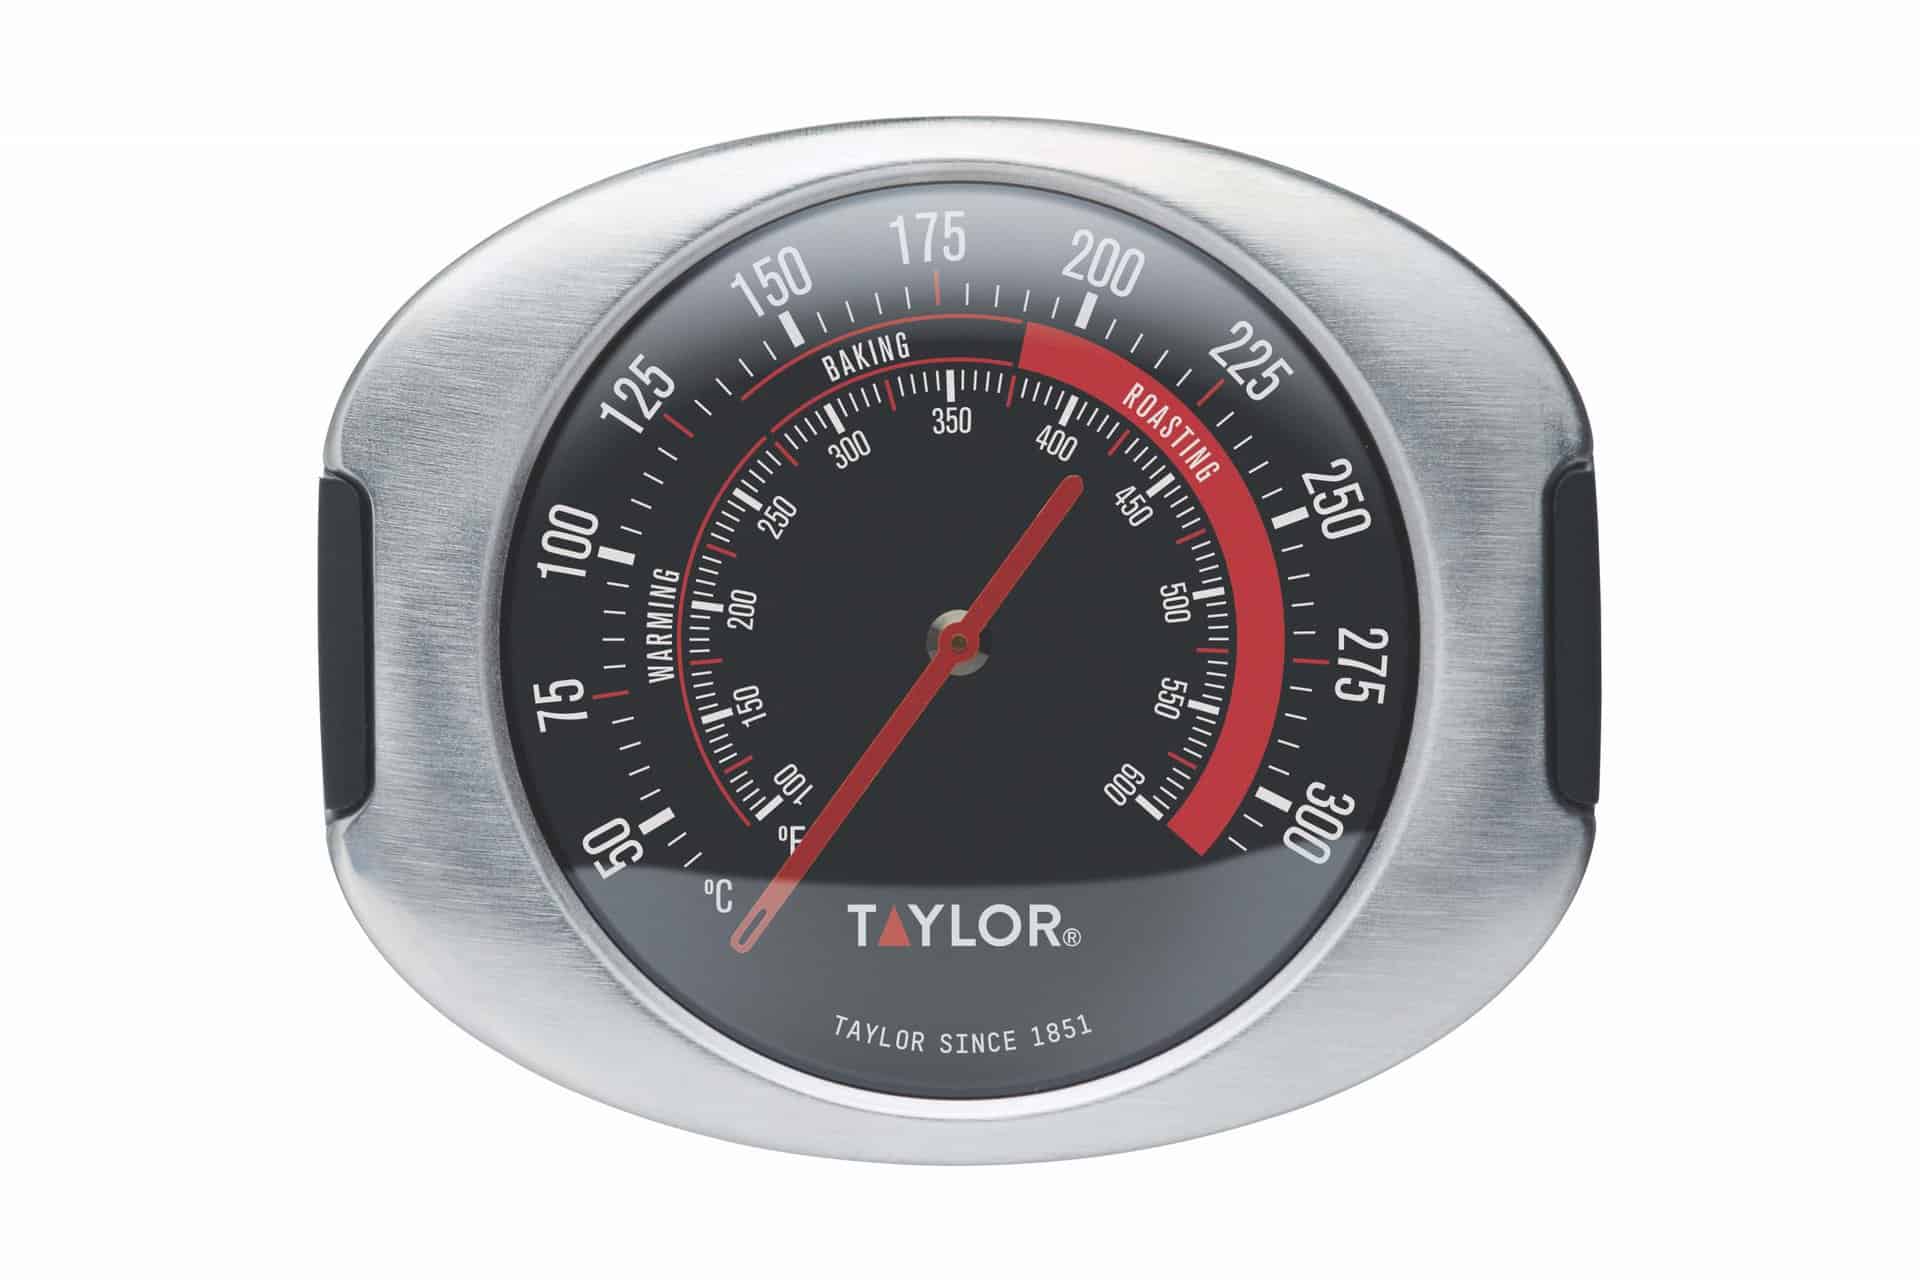 Oven Thermometer – Taylor Pro Stainless Steel 